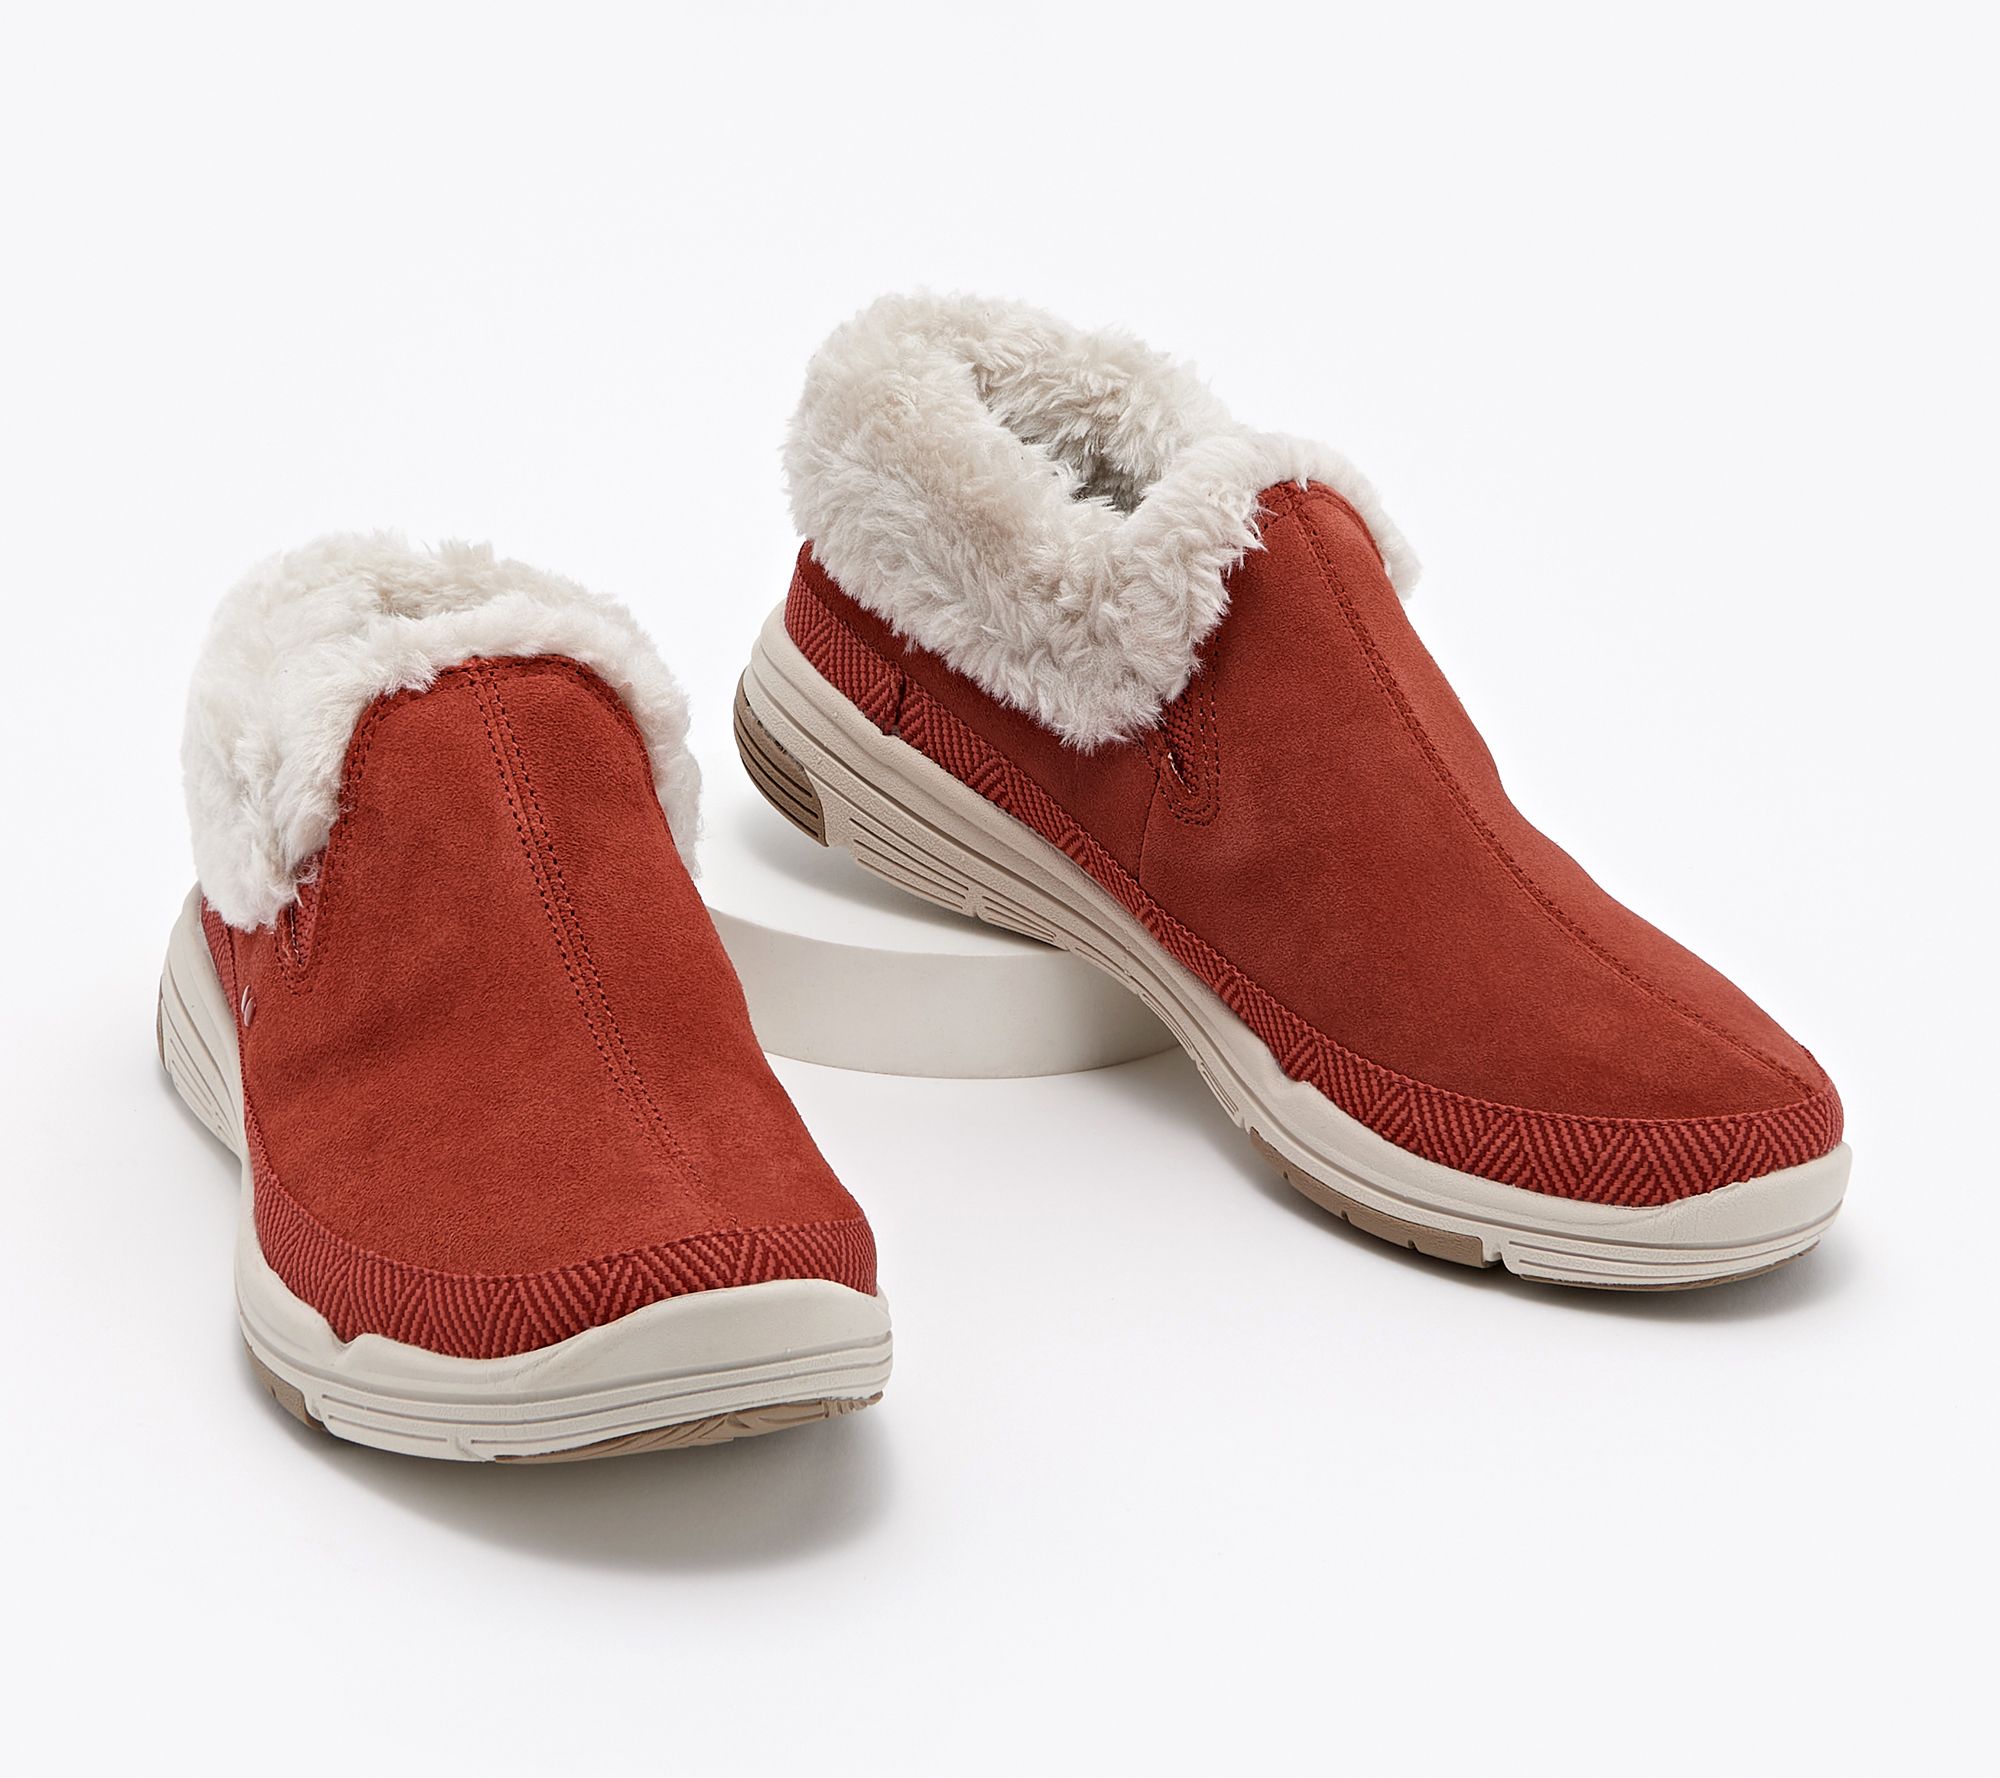 Ryka Water-Repellent Suede and Faux Fur Slip-Ons - Adventure - QVC.com